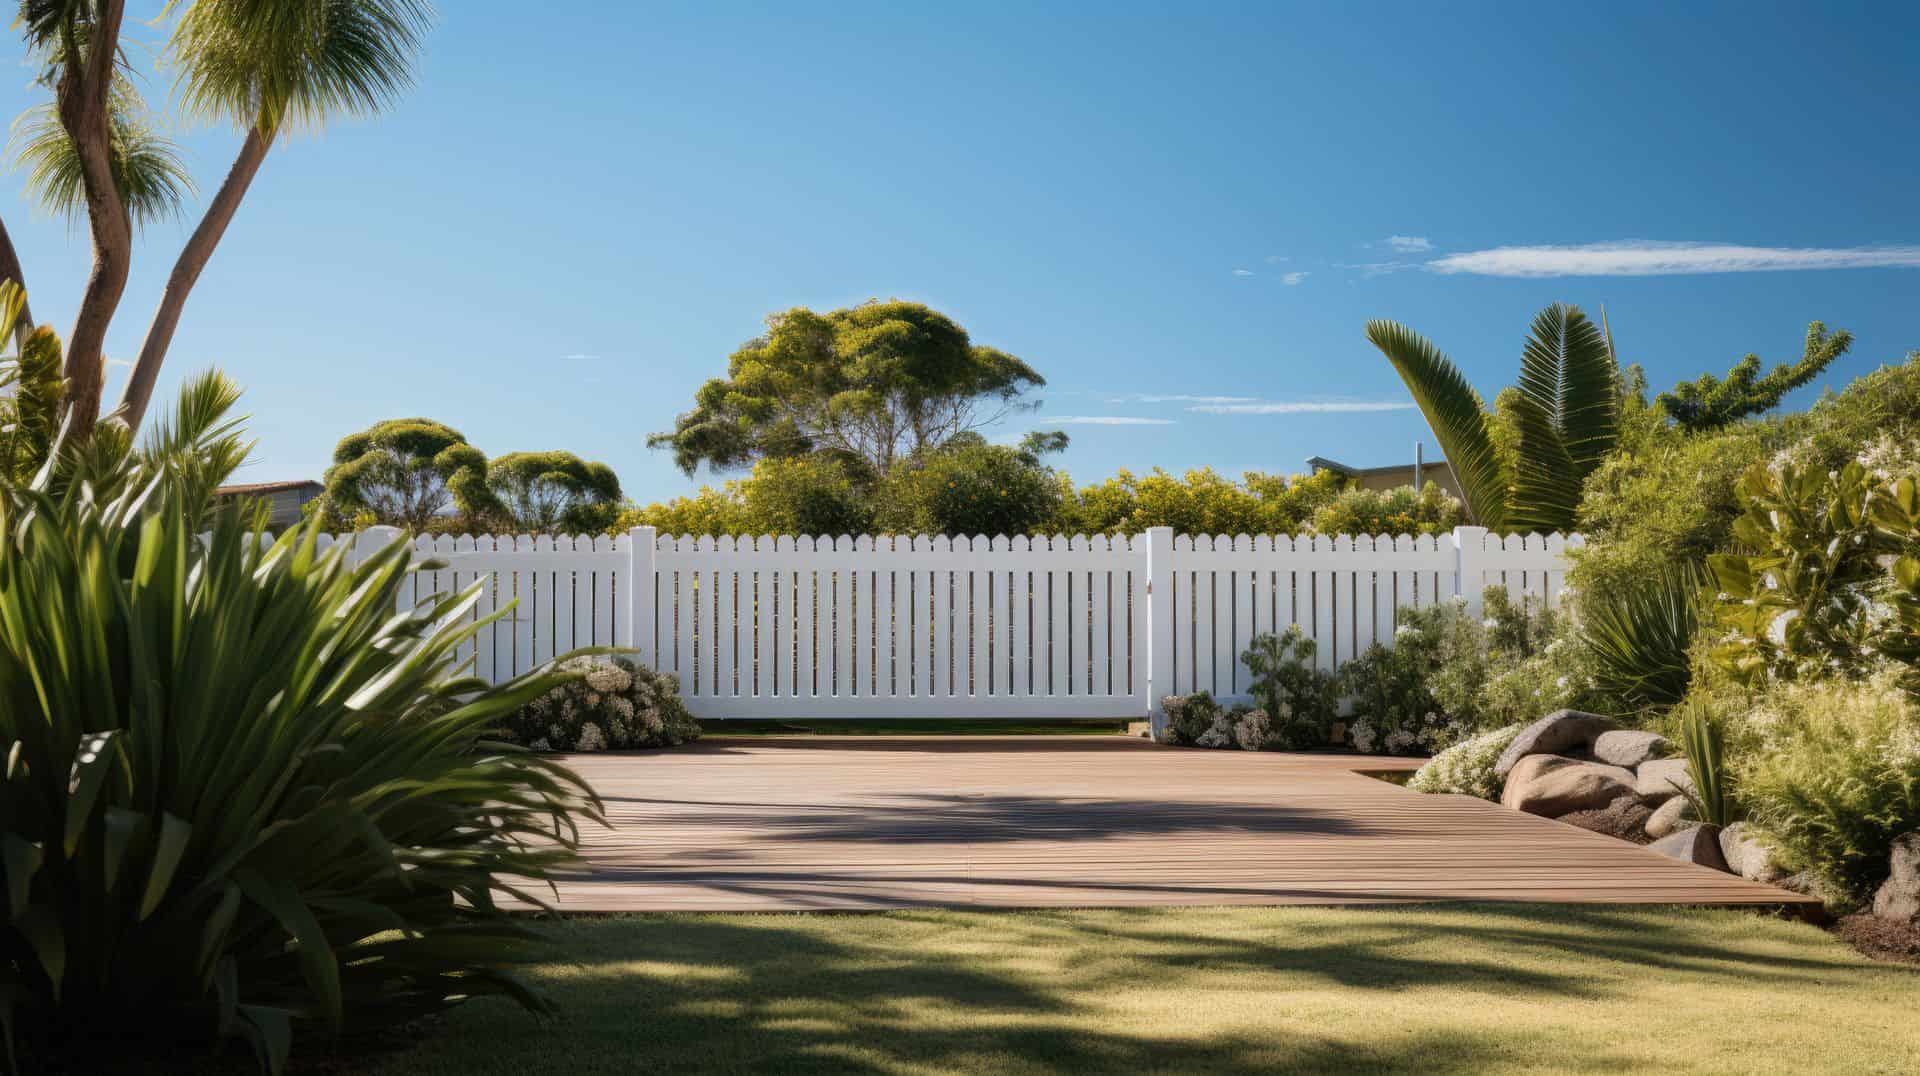 Vinyl picket fence behind large tree on front lawn with wooden platform and hedge wall with lush garden and plants.